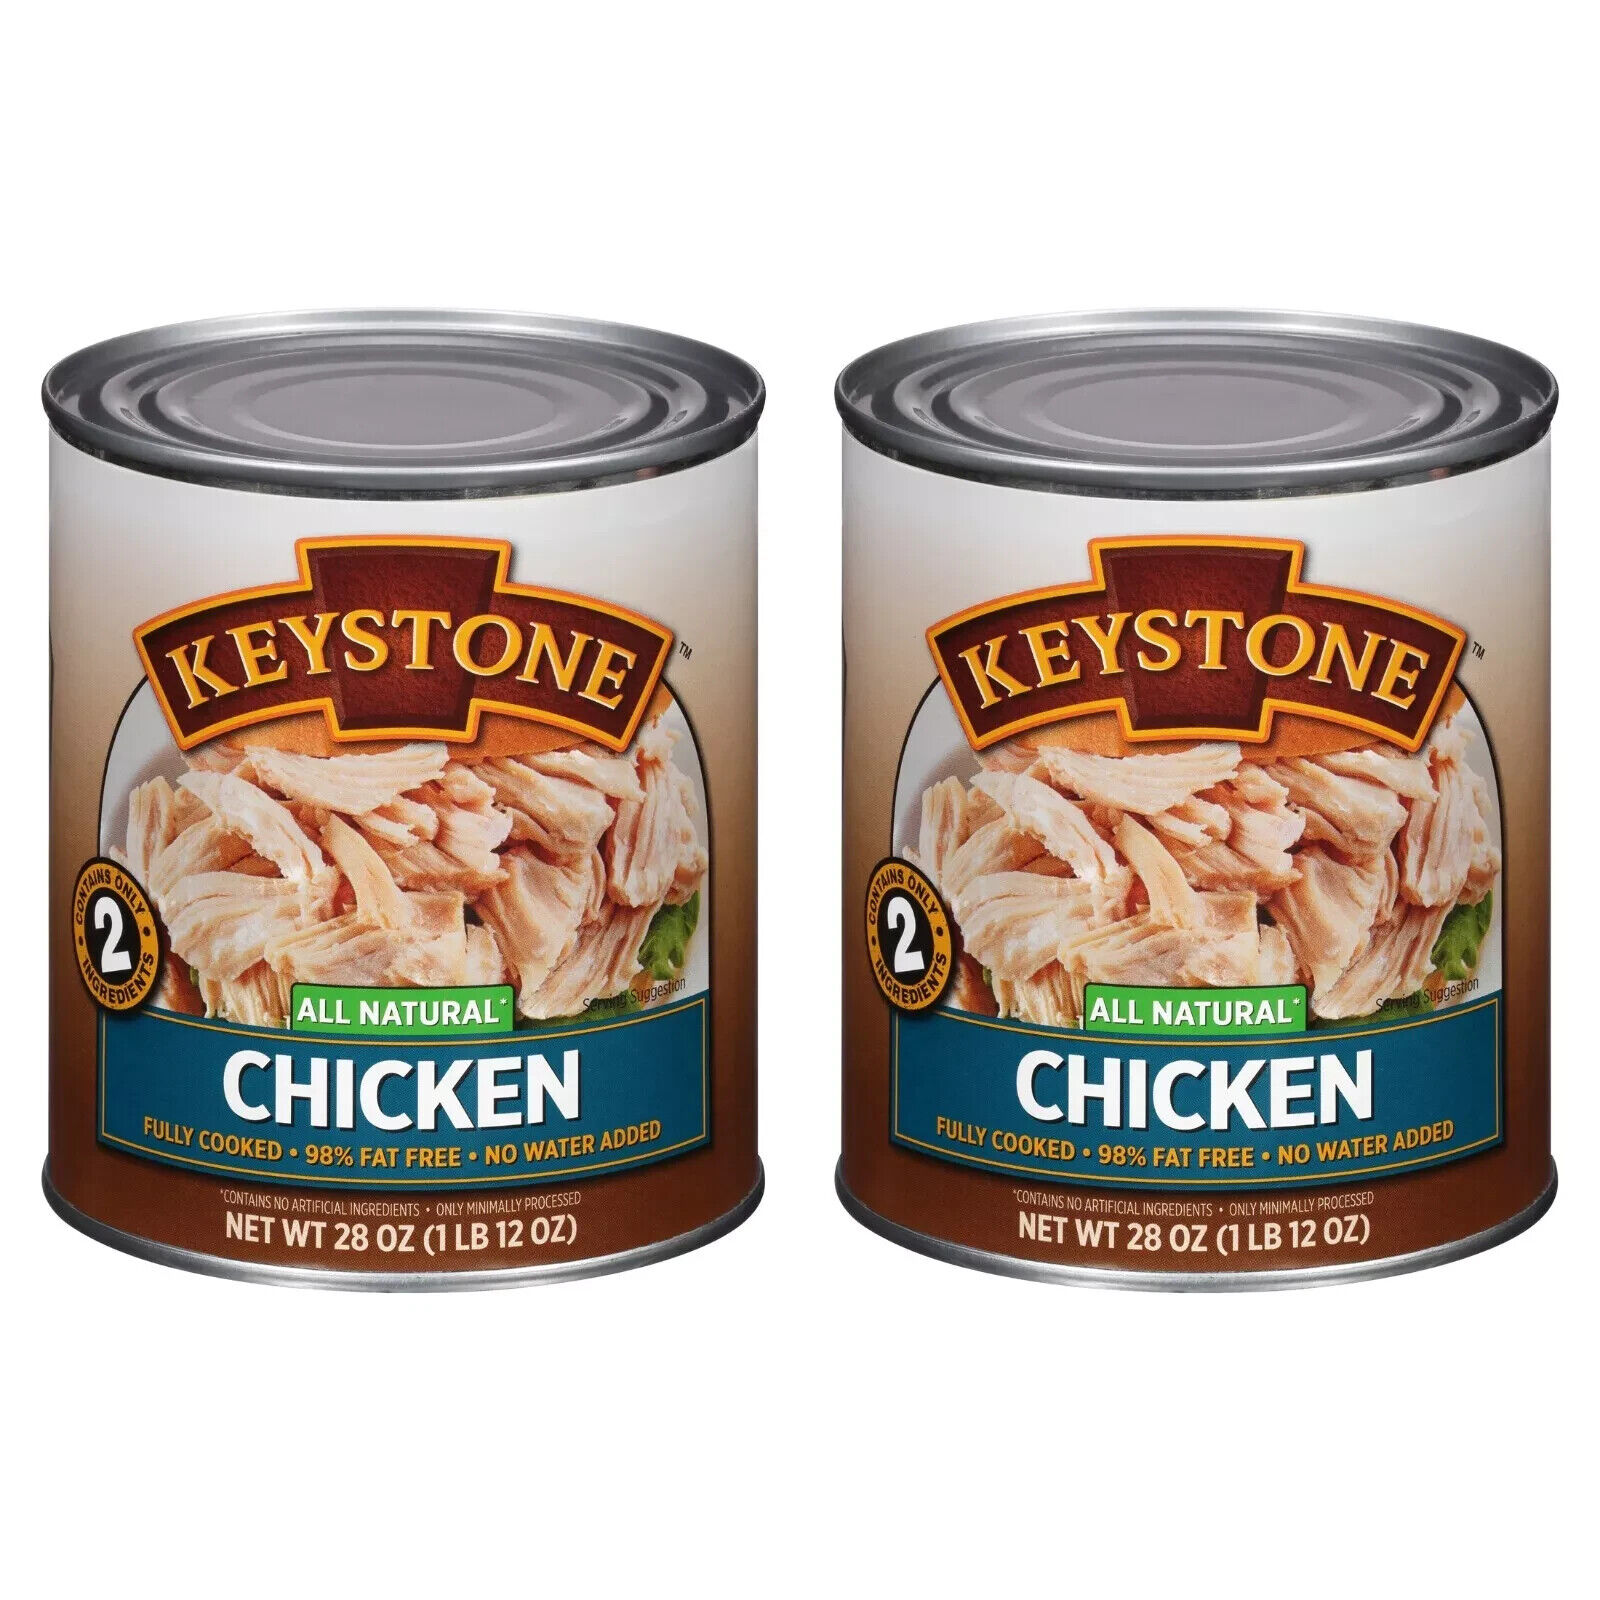 2 Cans- Keystone All Natural Chicken 28 oz ✅ No Preservative Fully Cooked Food✅